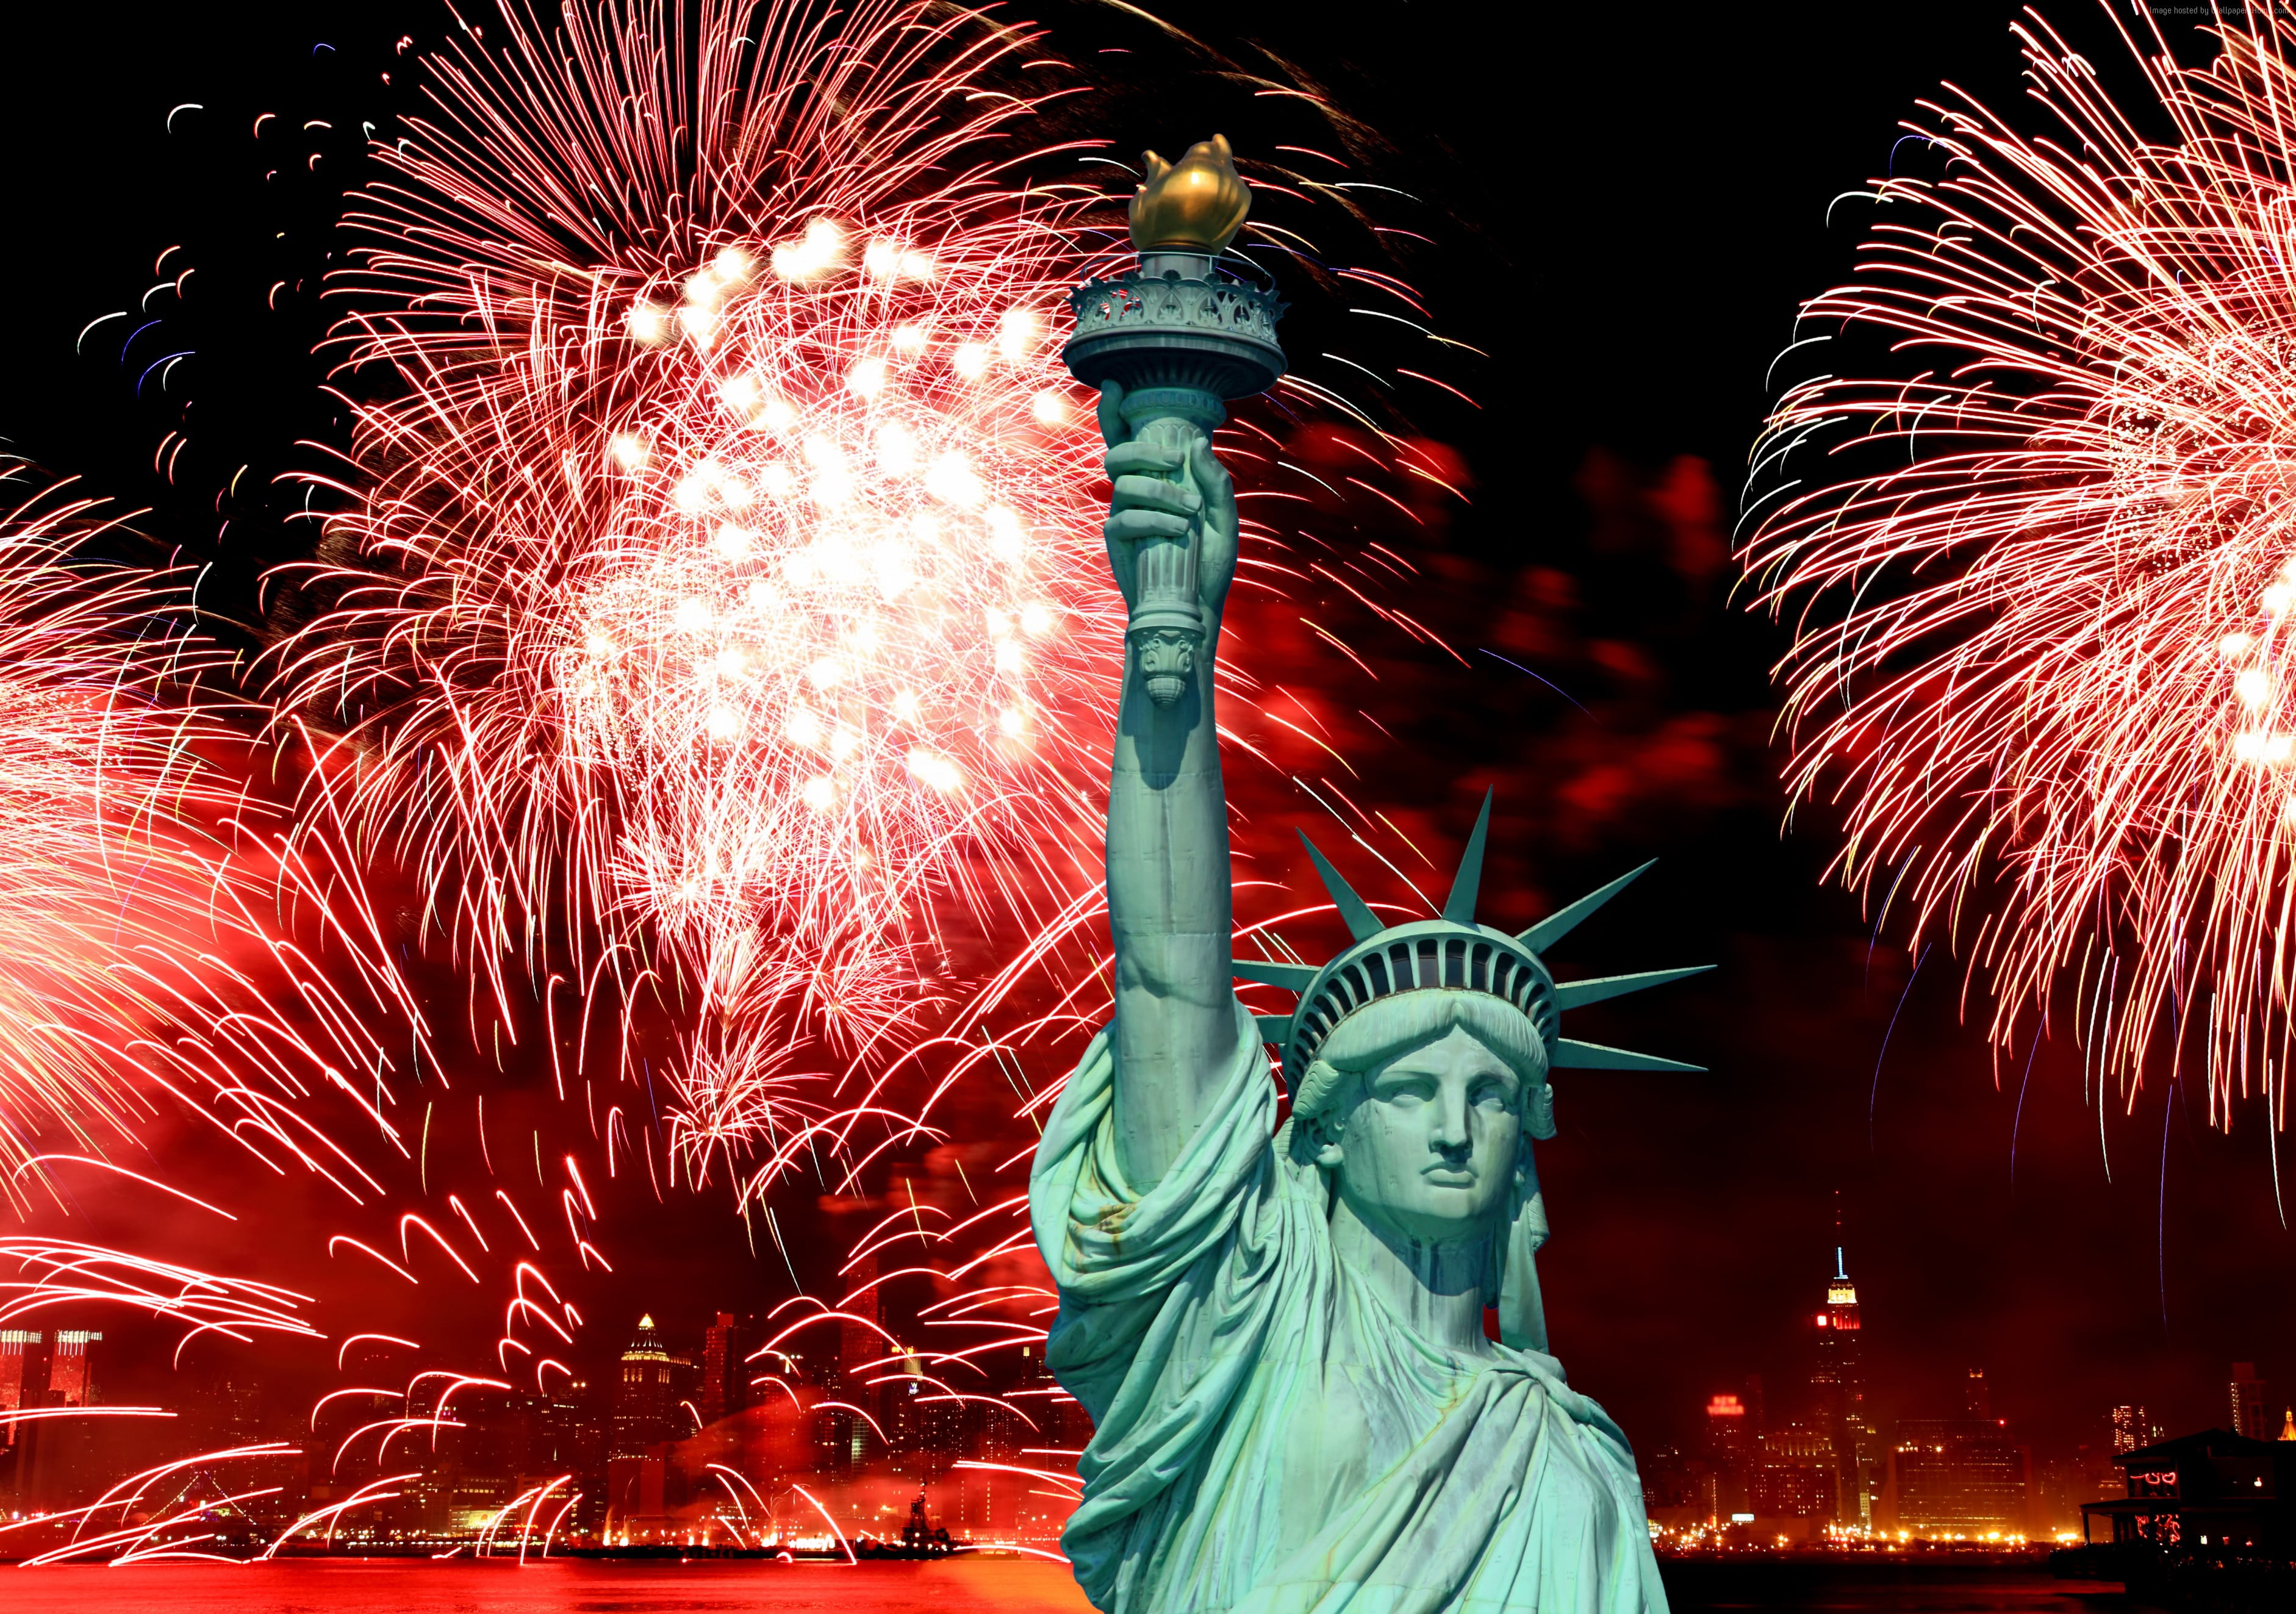 Statue of Liberty, New York with fireworks background